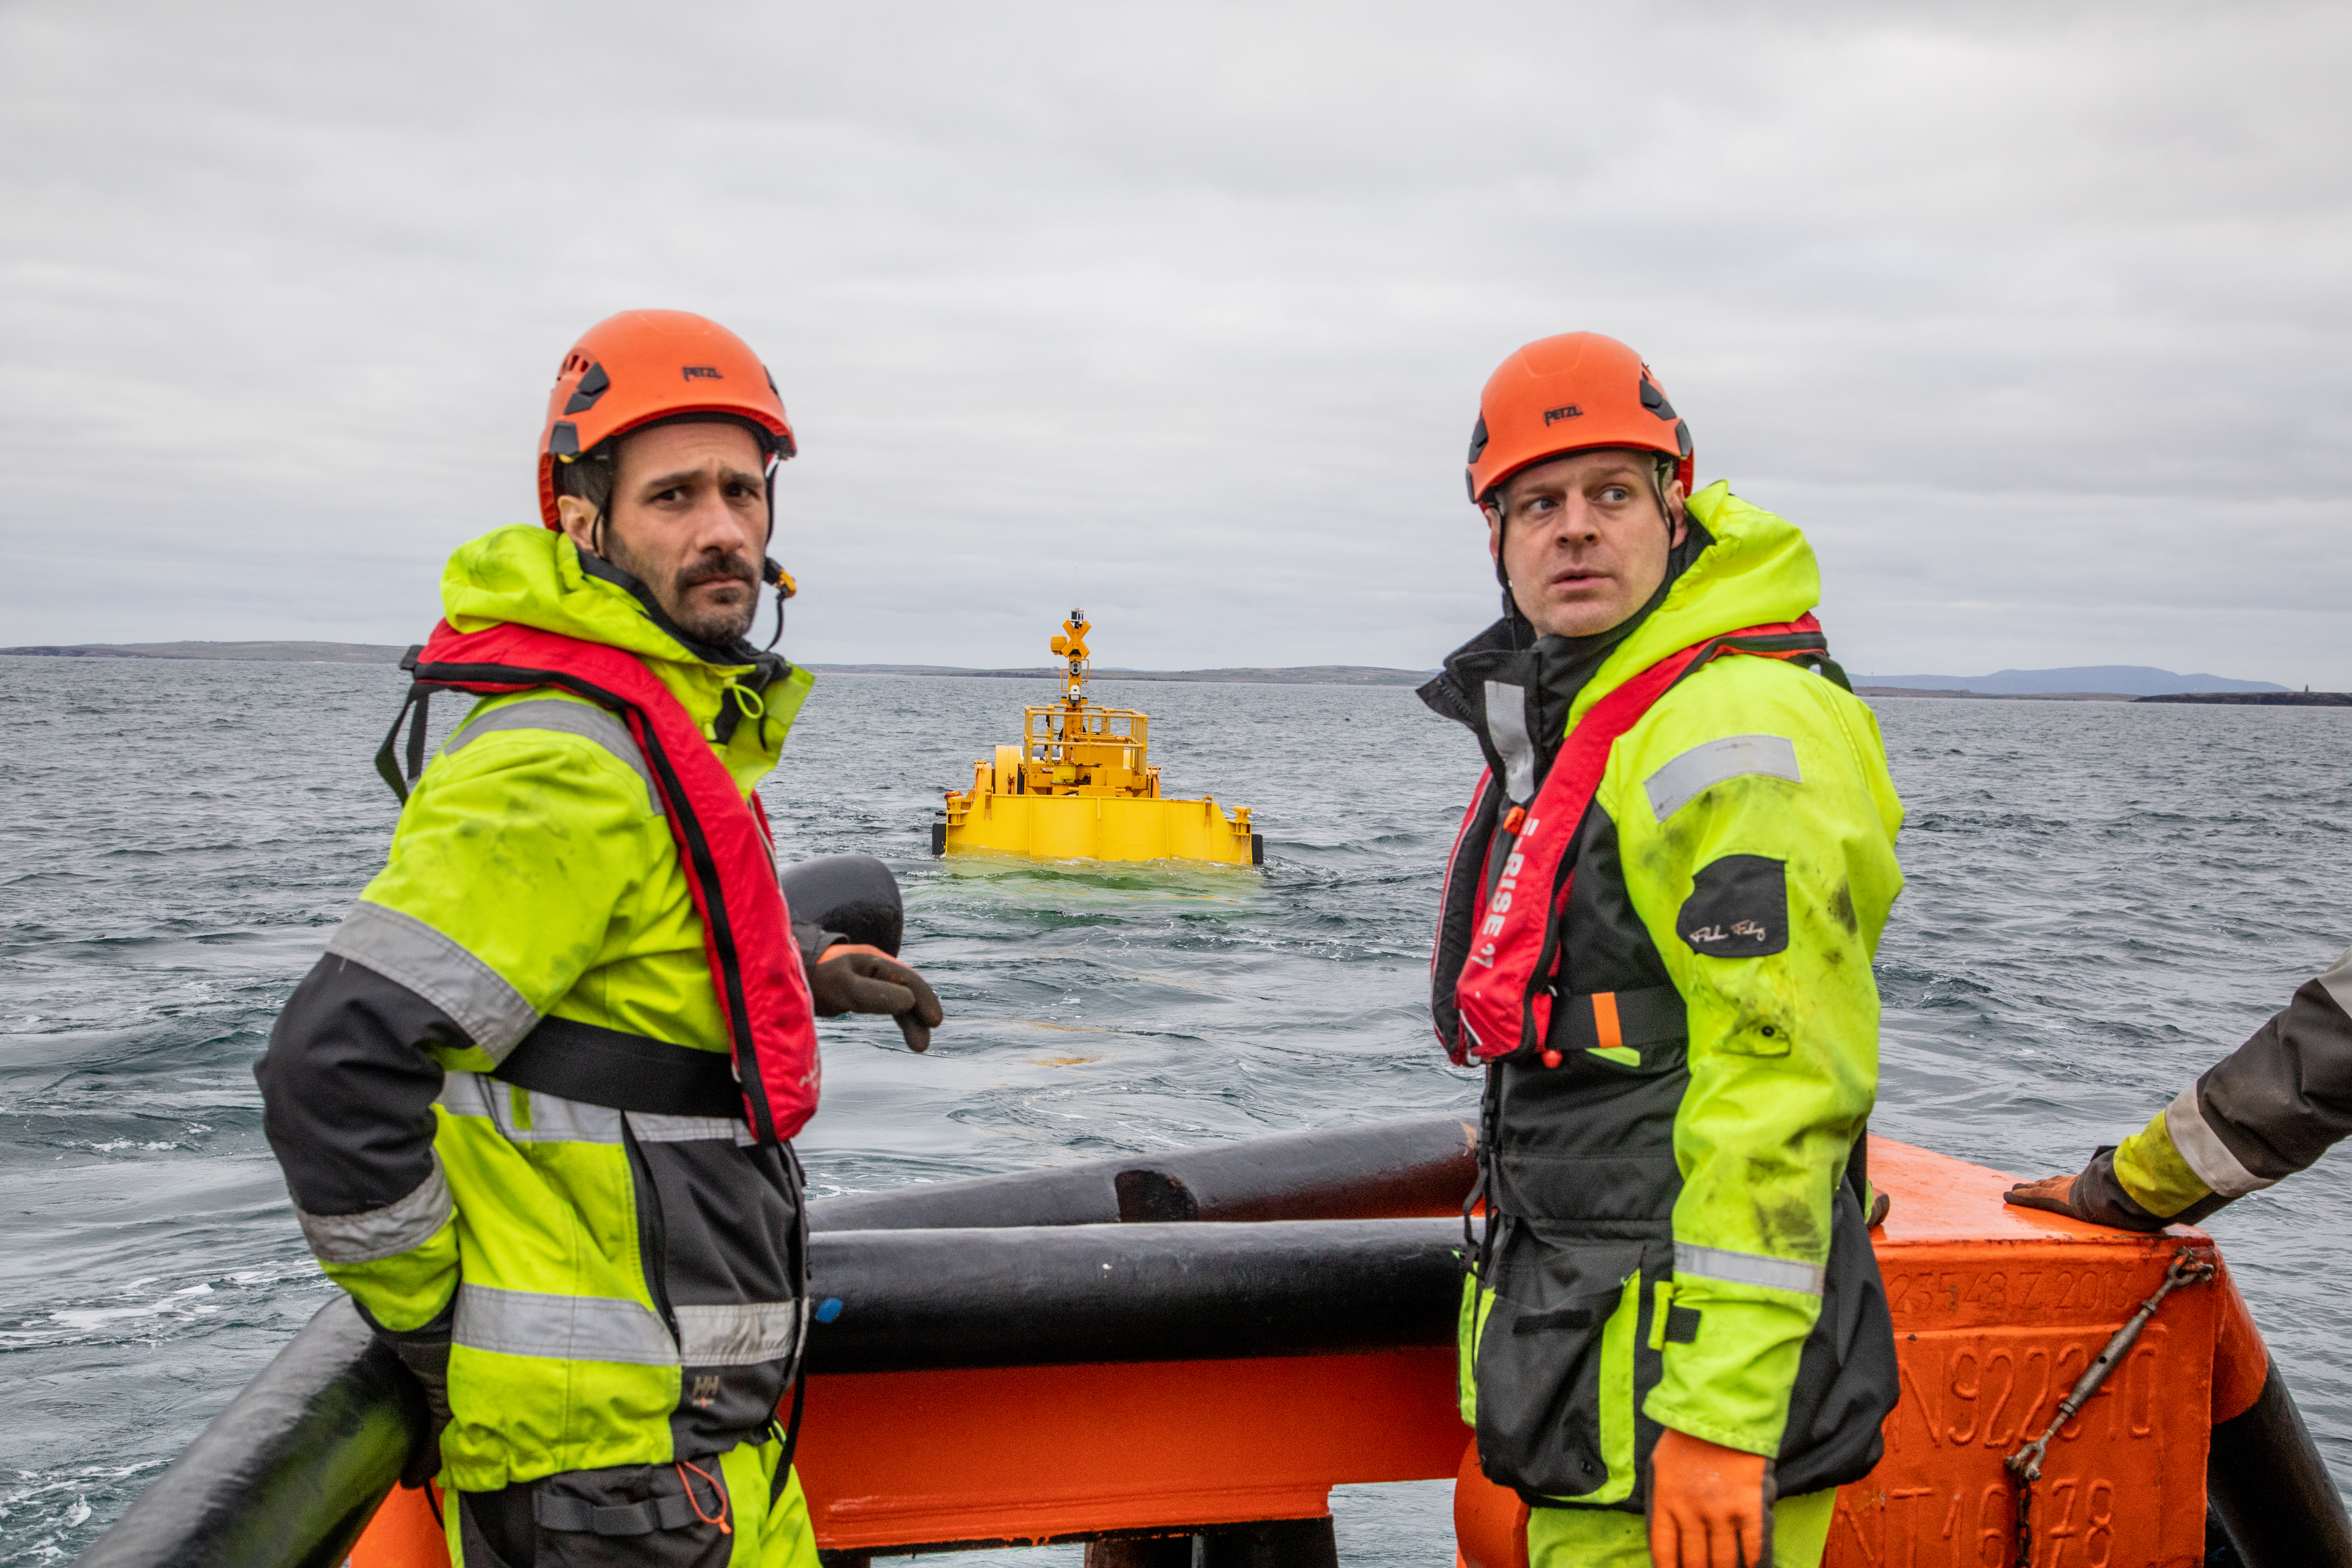 Collaborative wave power project aims to decarbonise subsea operations